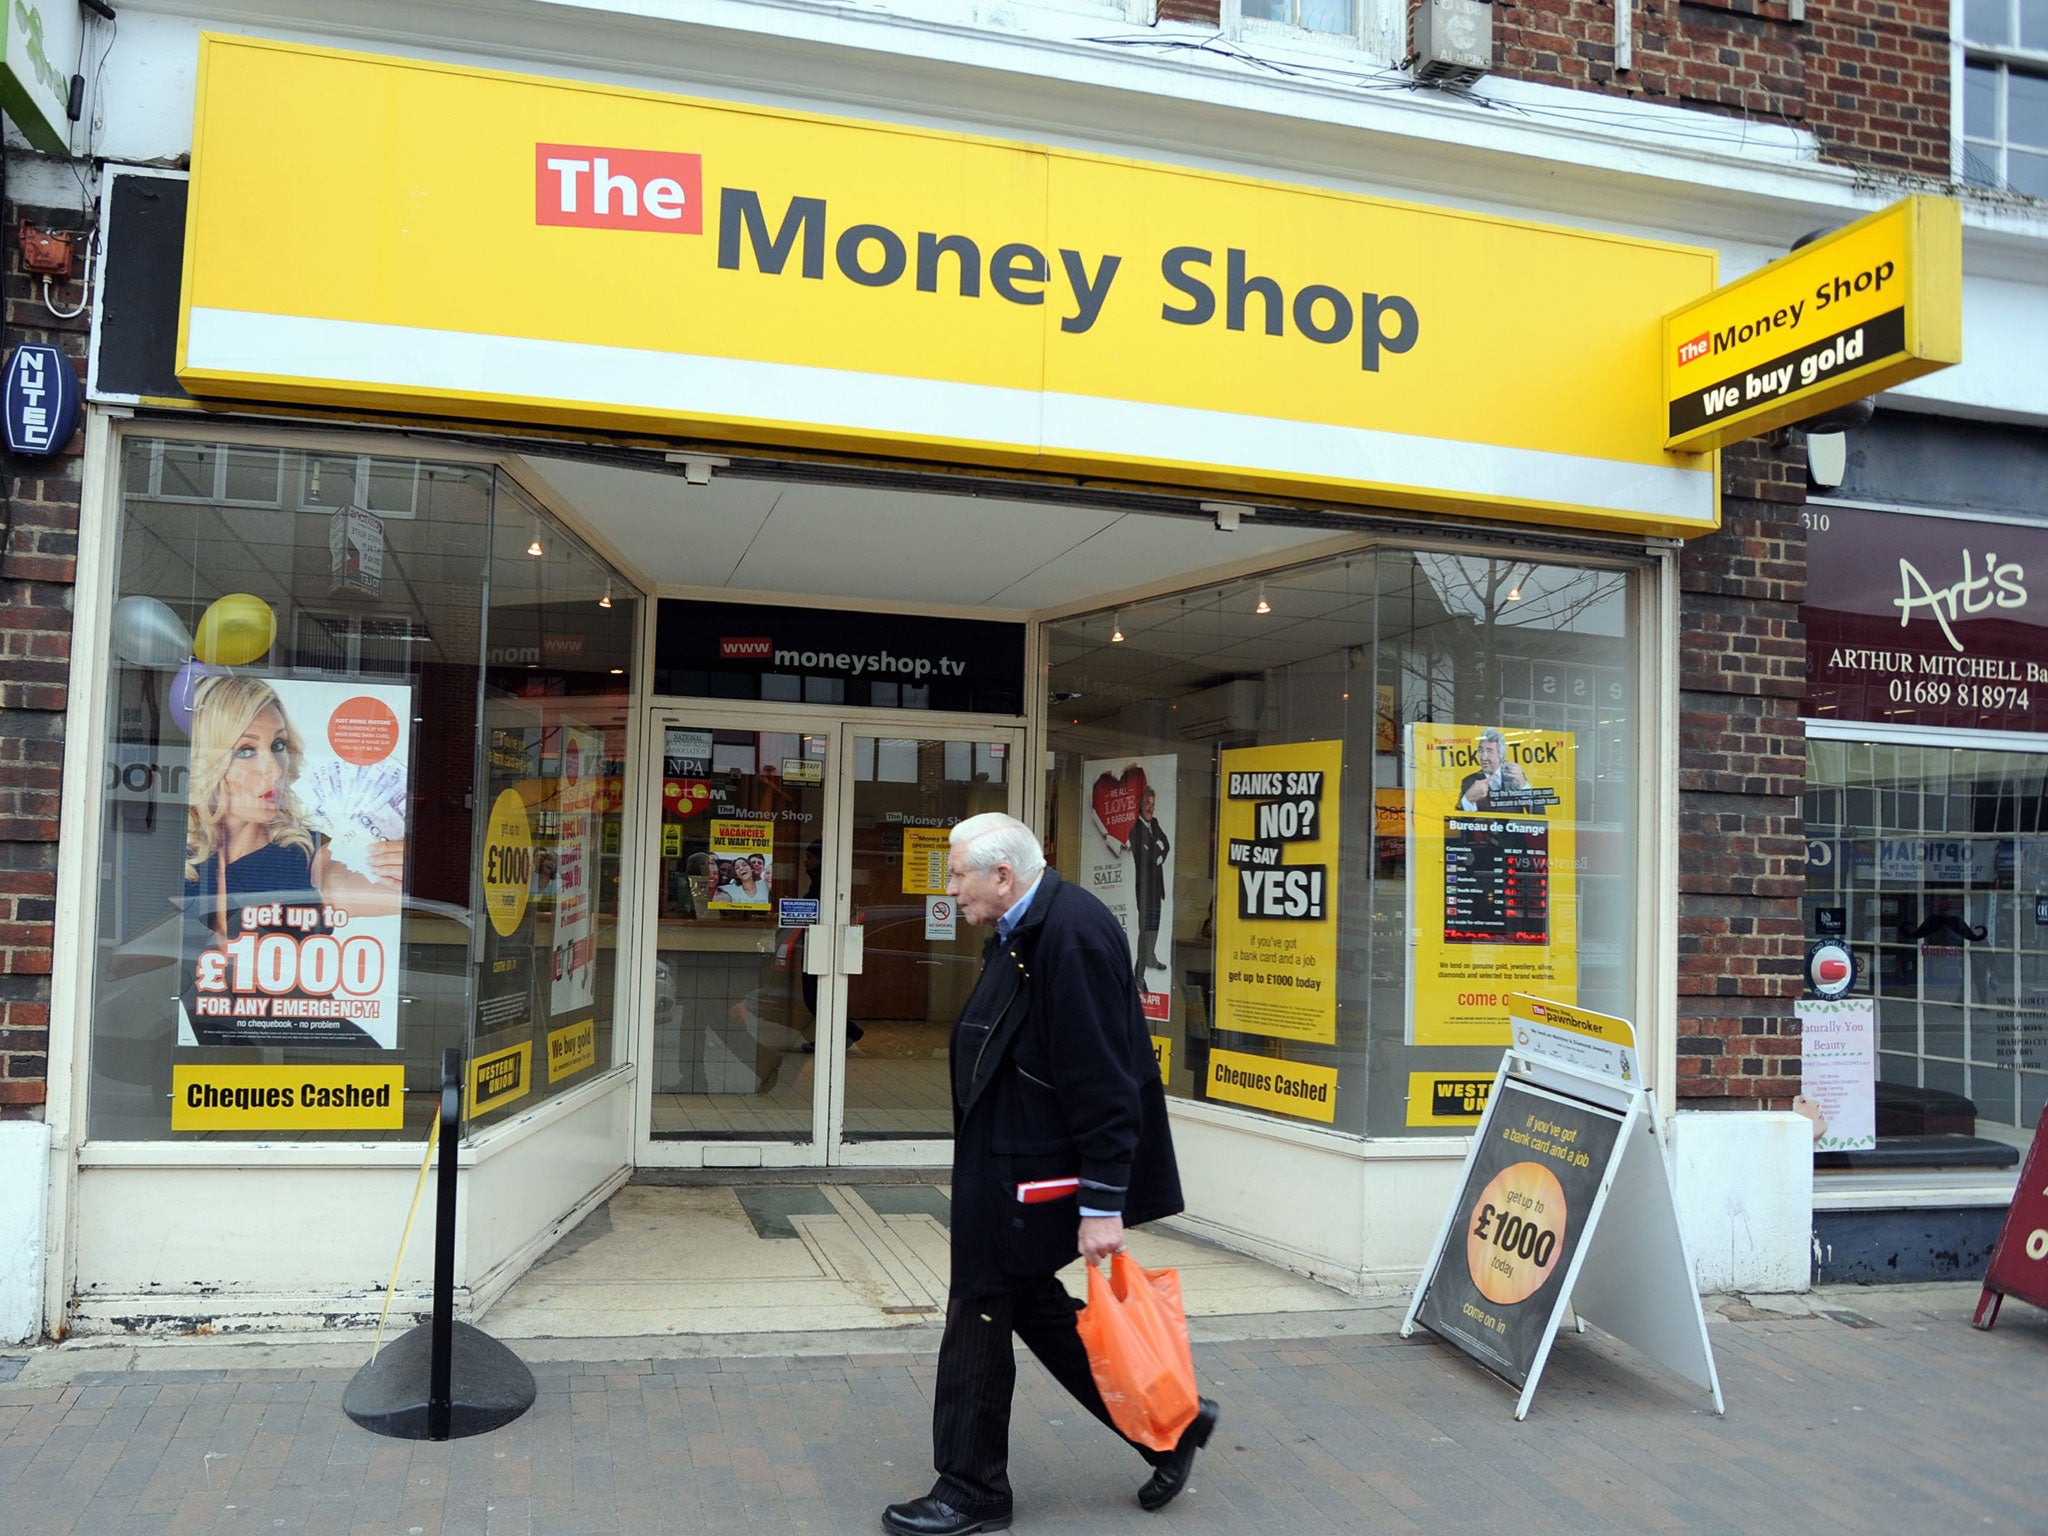 The Money Shop this week became the latest payday lender to have an ad banned